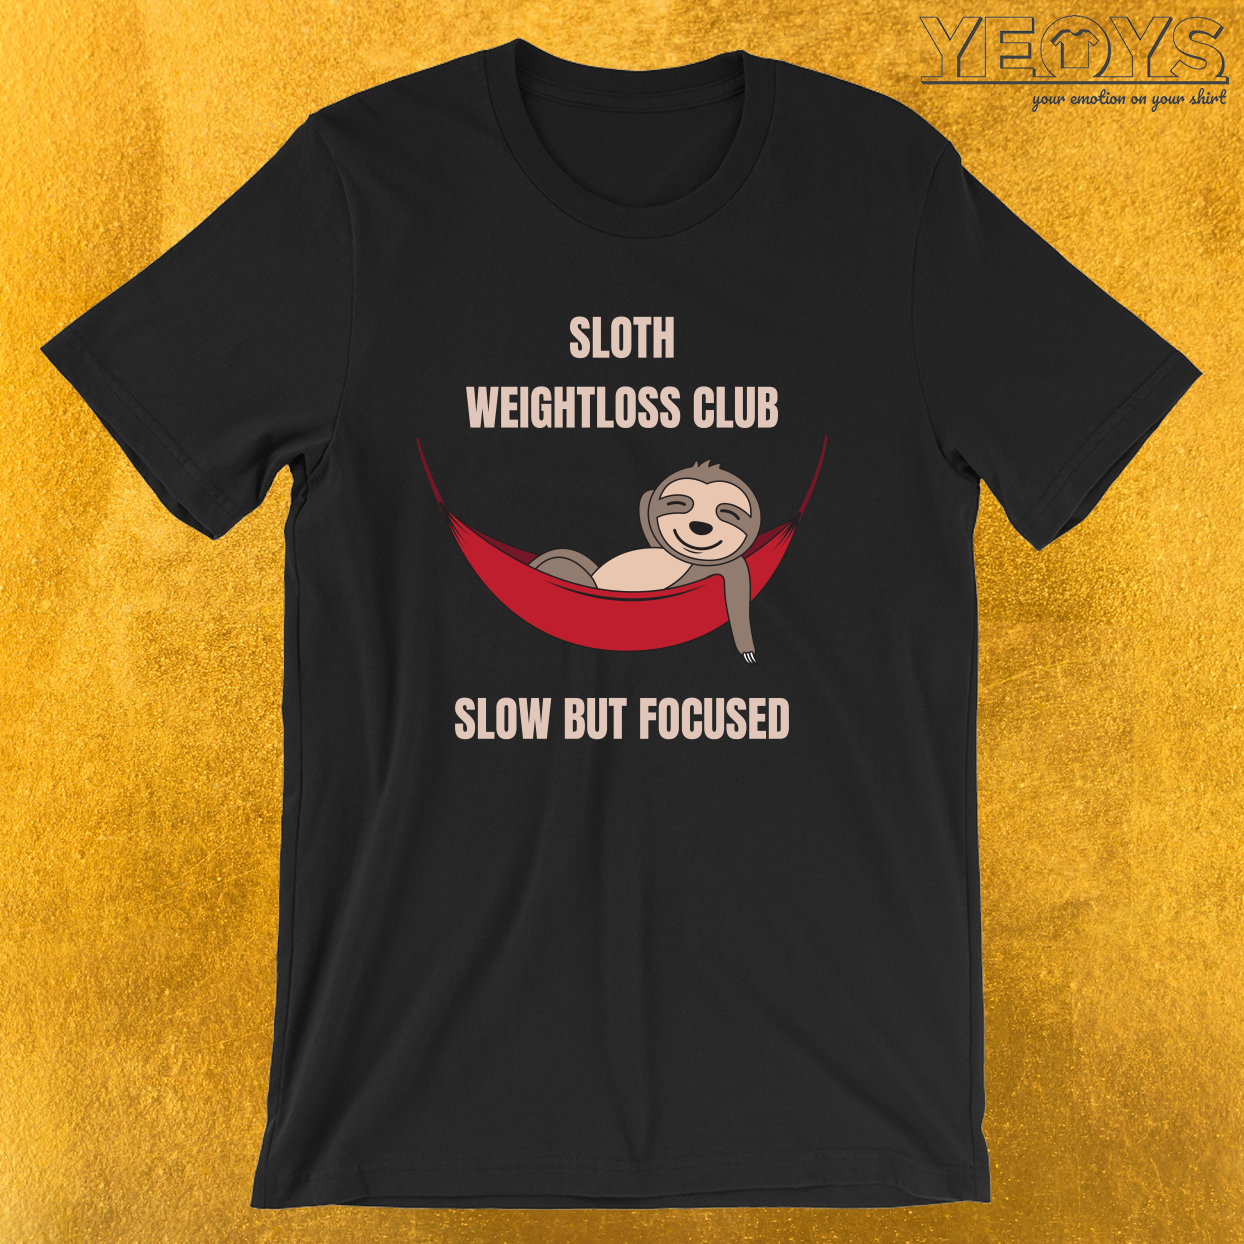 Sloth Weightloss Club Slow But Focused – Funny Team Sloth Tee